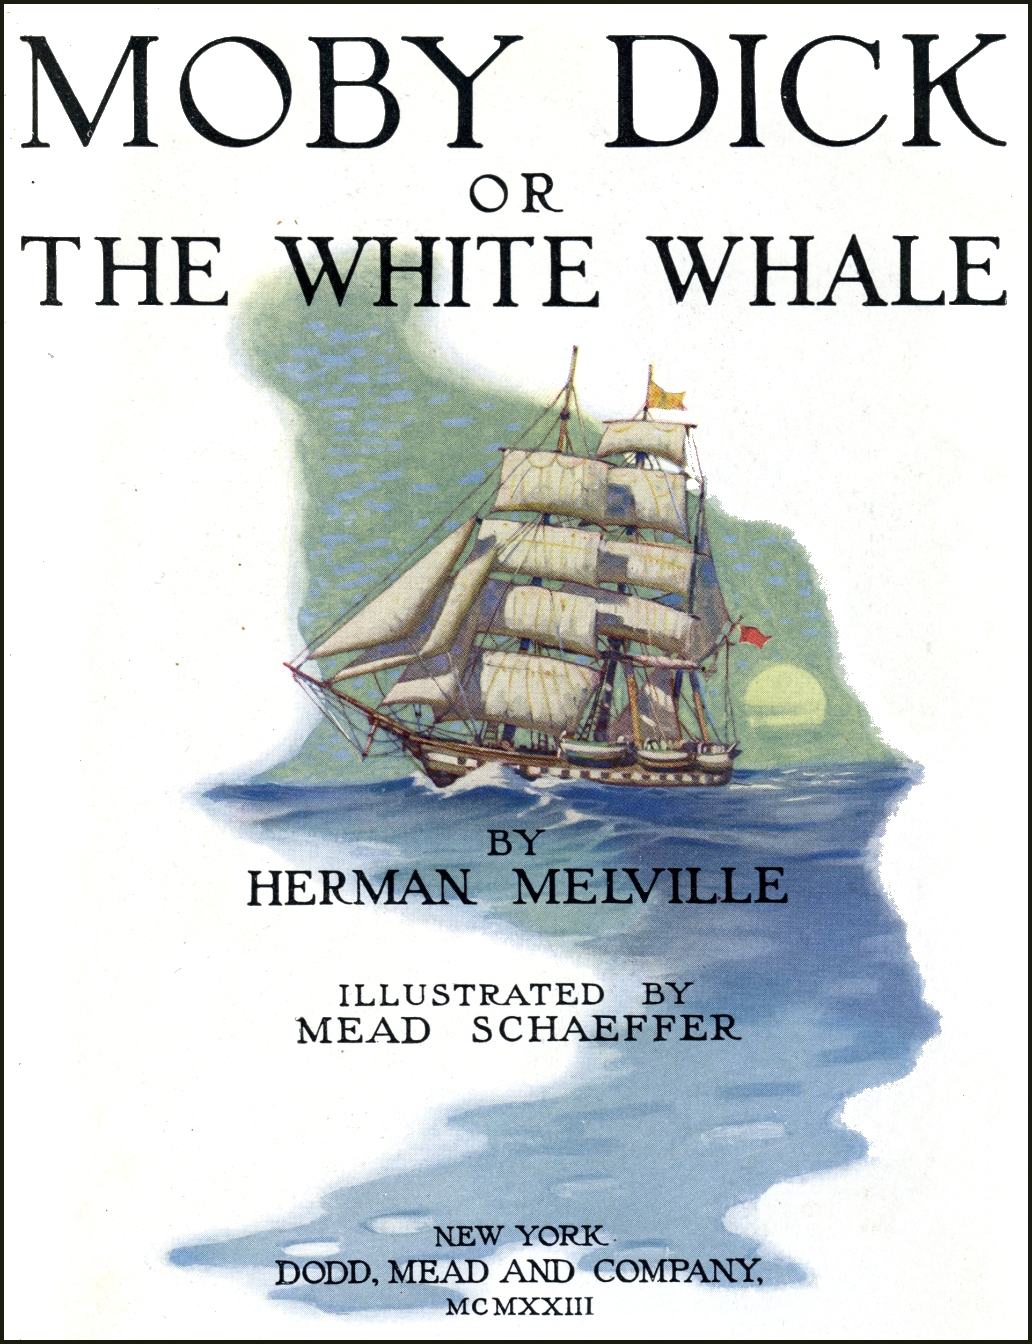 Moby dick speech white whale quote